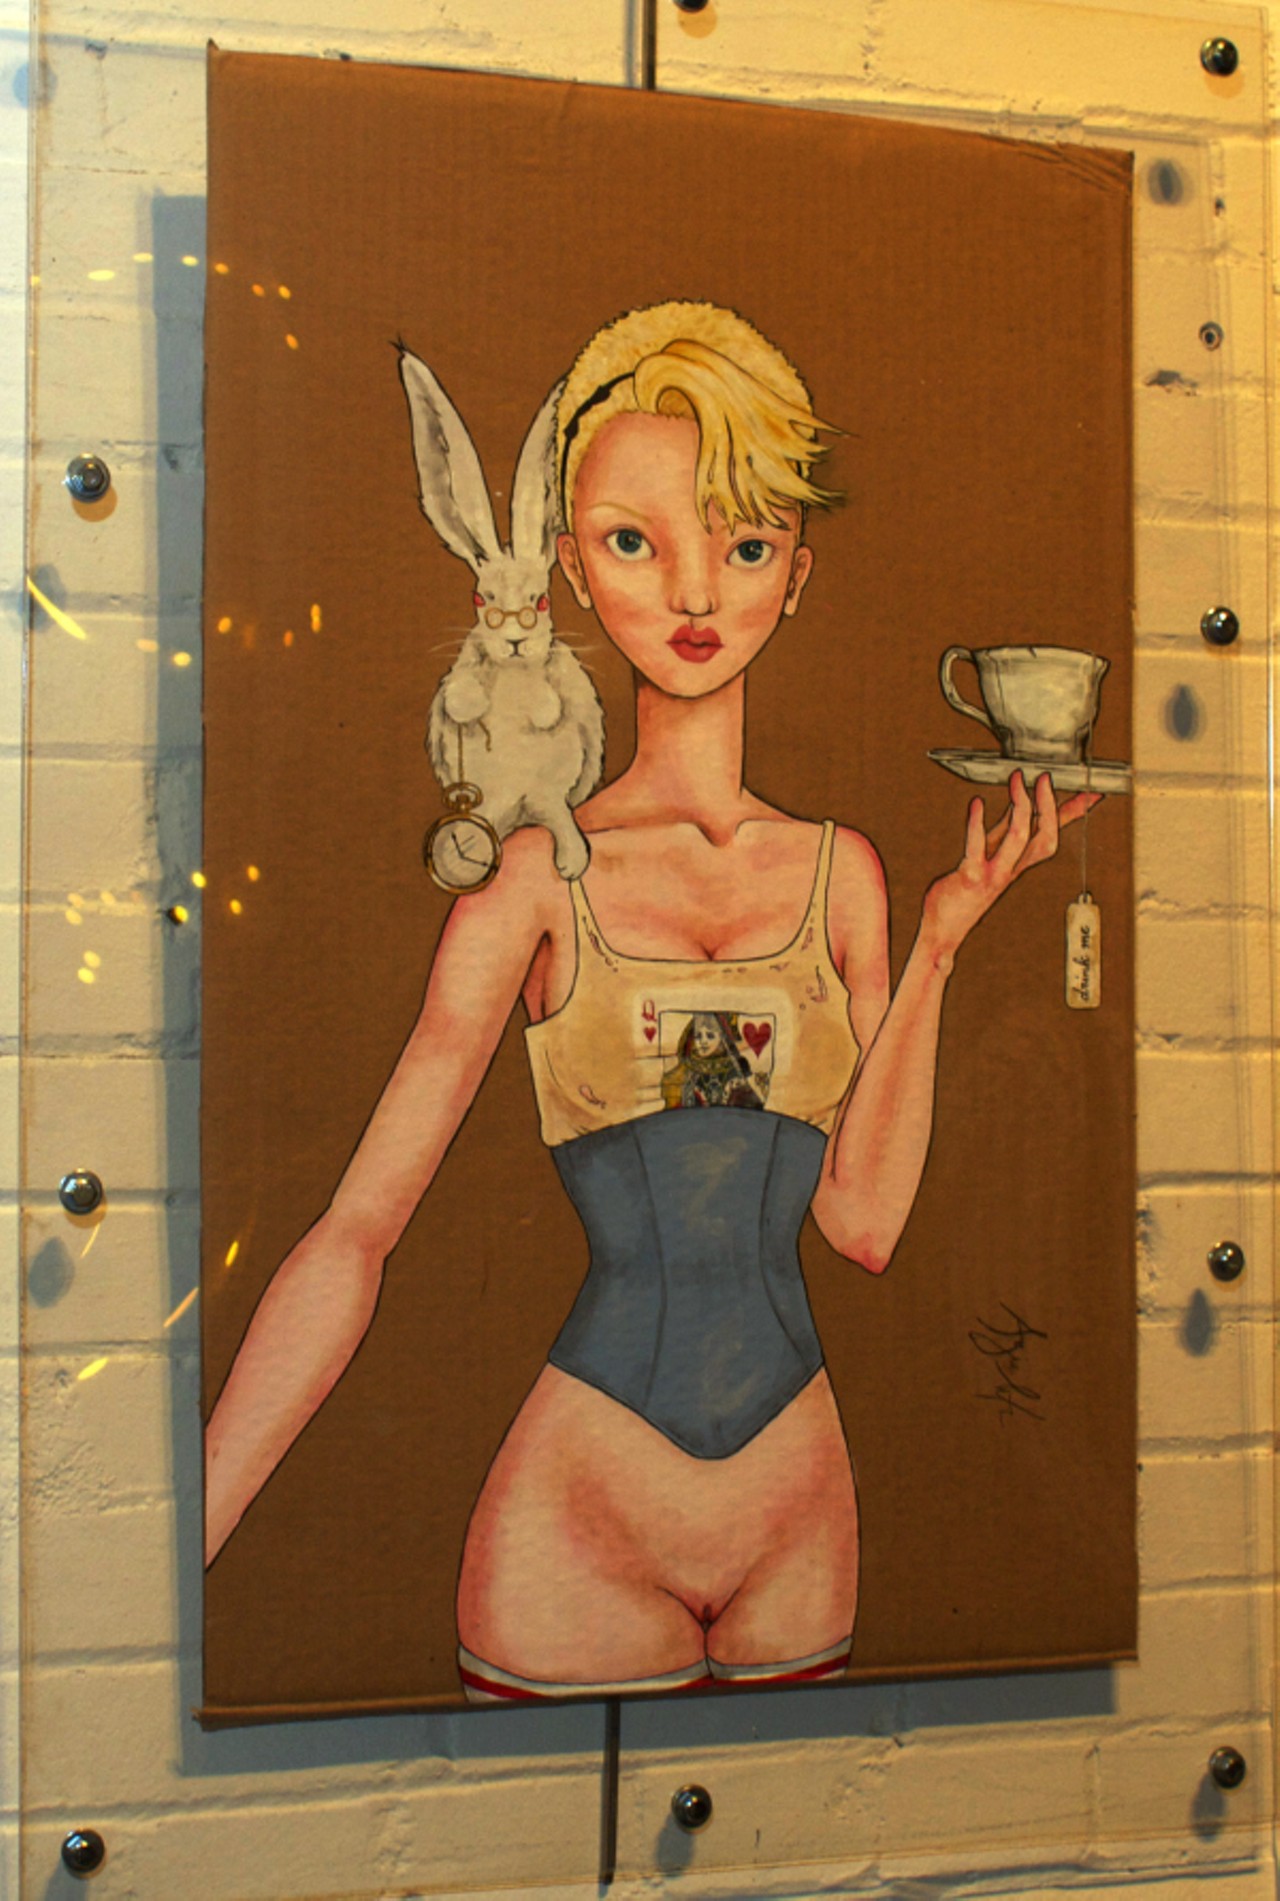 This acrylic painting by Angie Meuth is simply titled "Alice."&nbsp; As with most of her work, this was painted on cardboard and was selling for $350.